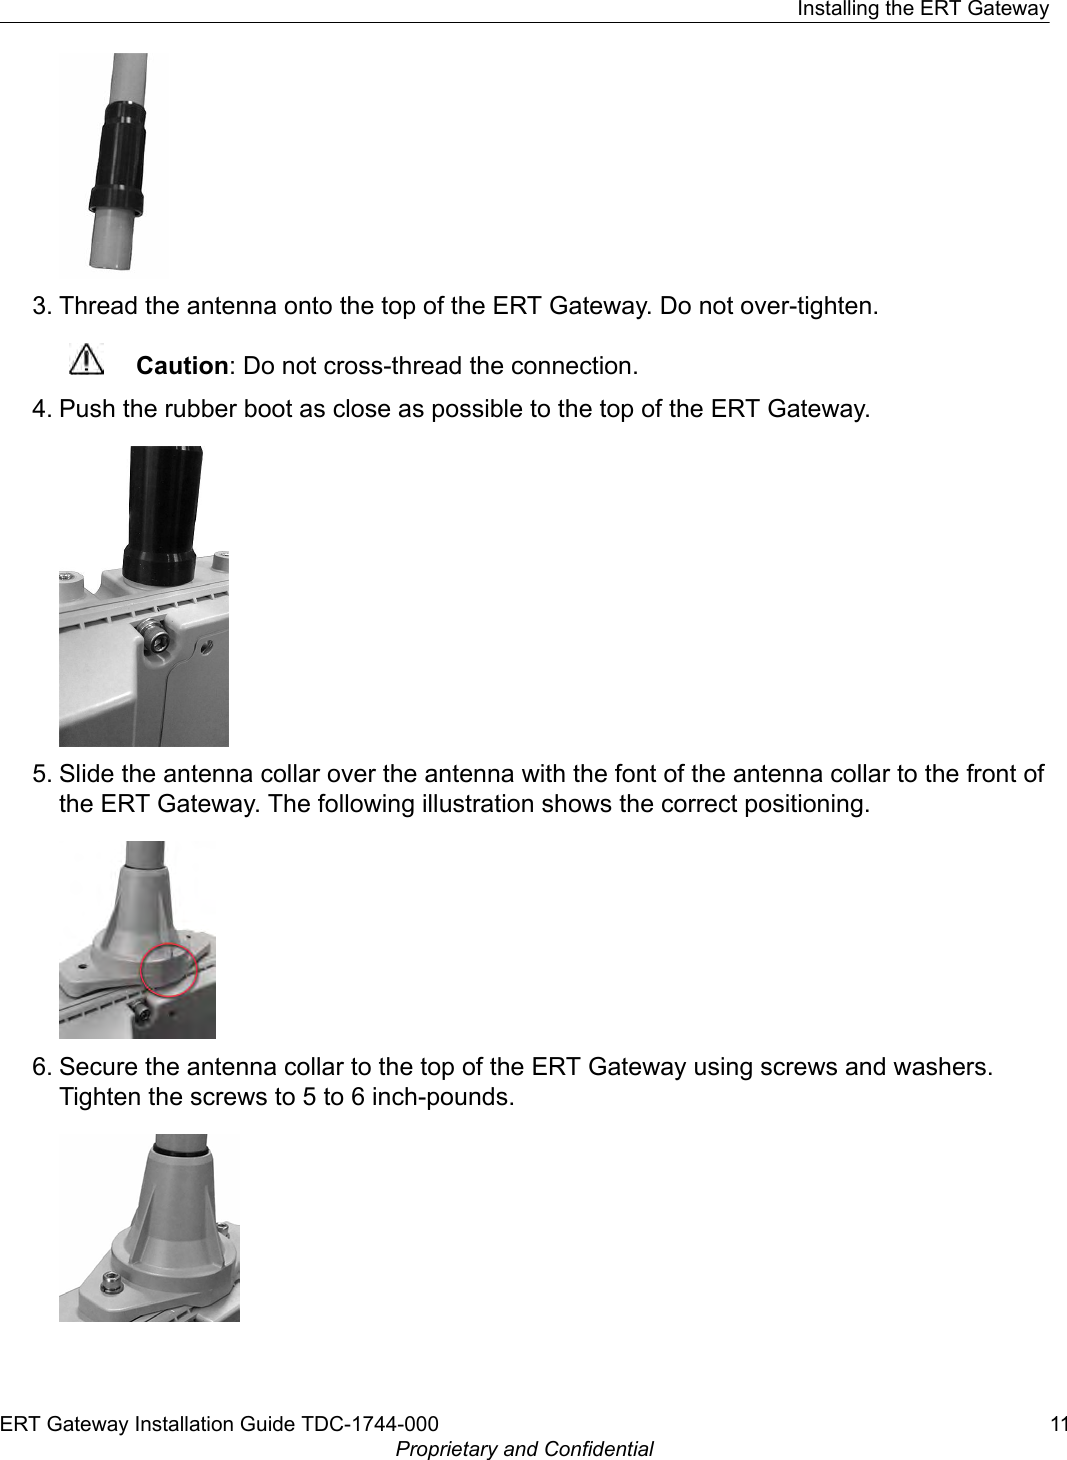 3. Thread the antenna onto the top of the ERT Gateway. Do not over-tighten.Caution: Do not cross-thread the connection.4. Push the rubber boot as close as possible to the top of the ERT Gateway.5. Slide the antenna collar over the antenna with the font of the antenna collar to the front ofthe ERT Gateway. The following illustration shows the correct positioning.6. Secure the antenna collar to the top of the ERT Gateway using screws and washers.Tighten the screws to 5 to 6 inch-pounds.Installing the ERT GatewayERT Gateway Installation Guide TDC-1744-000 11Proprietary and Confidential